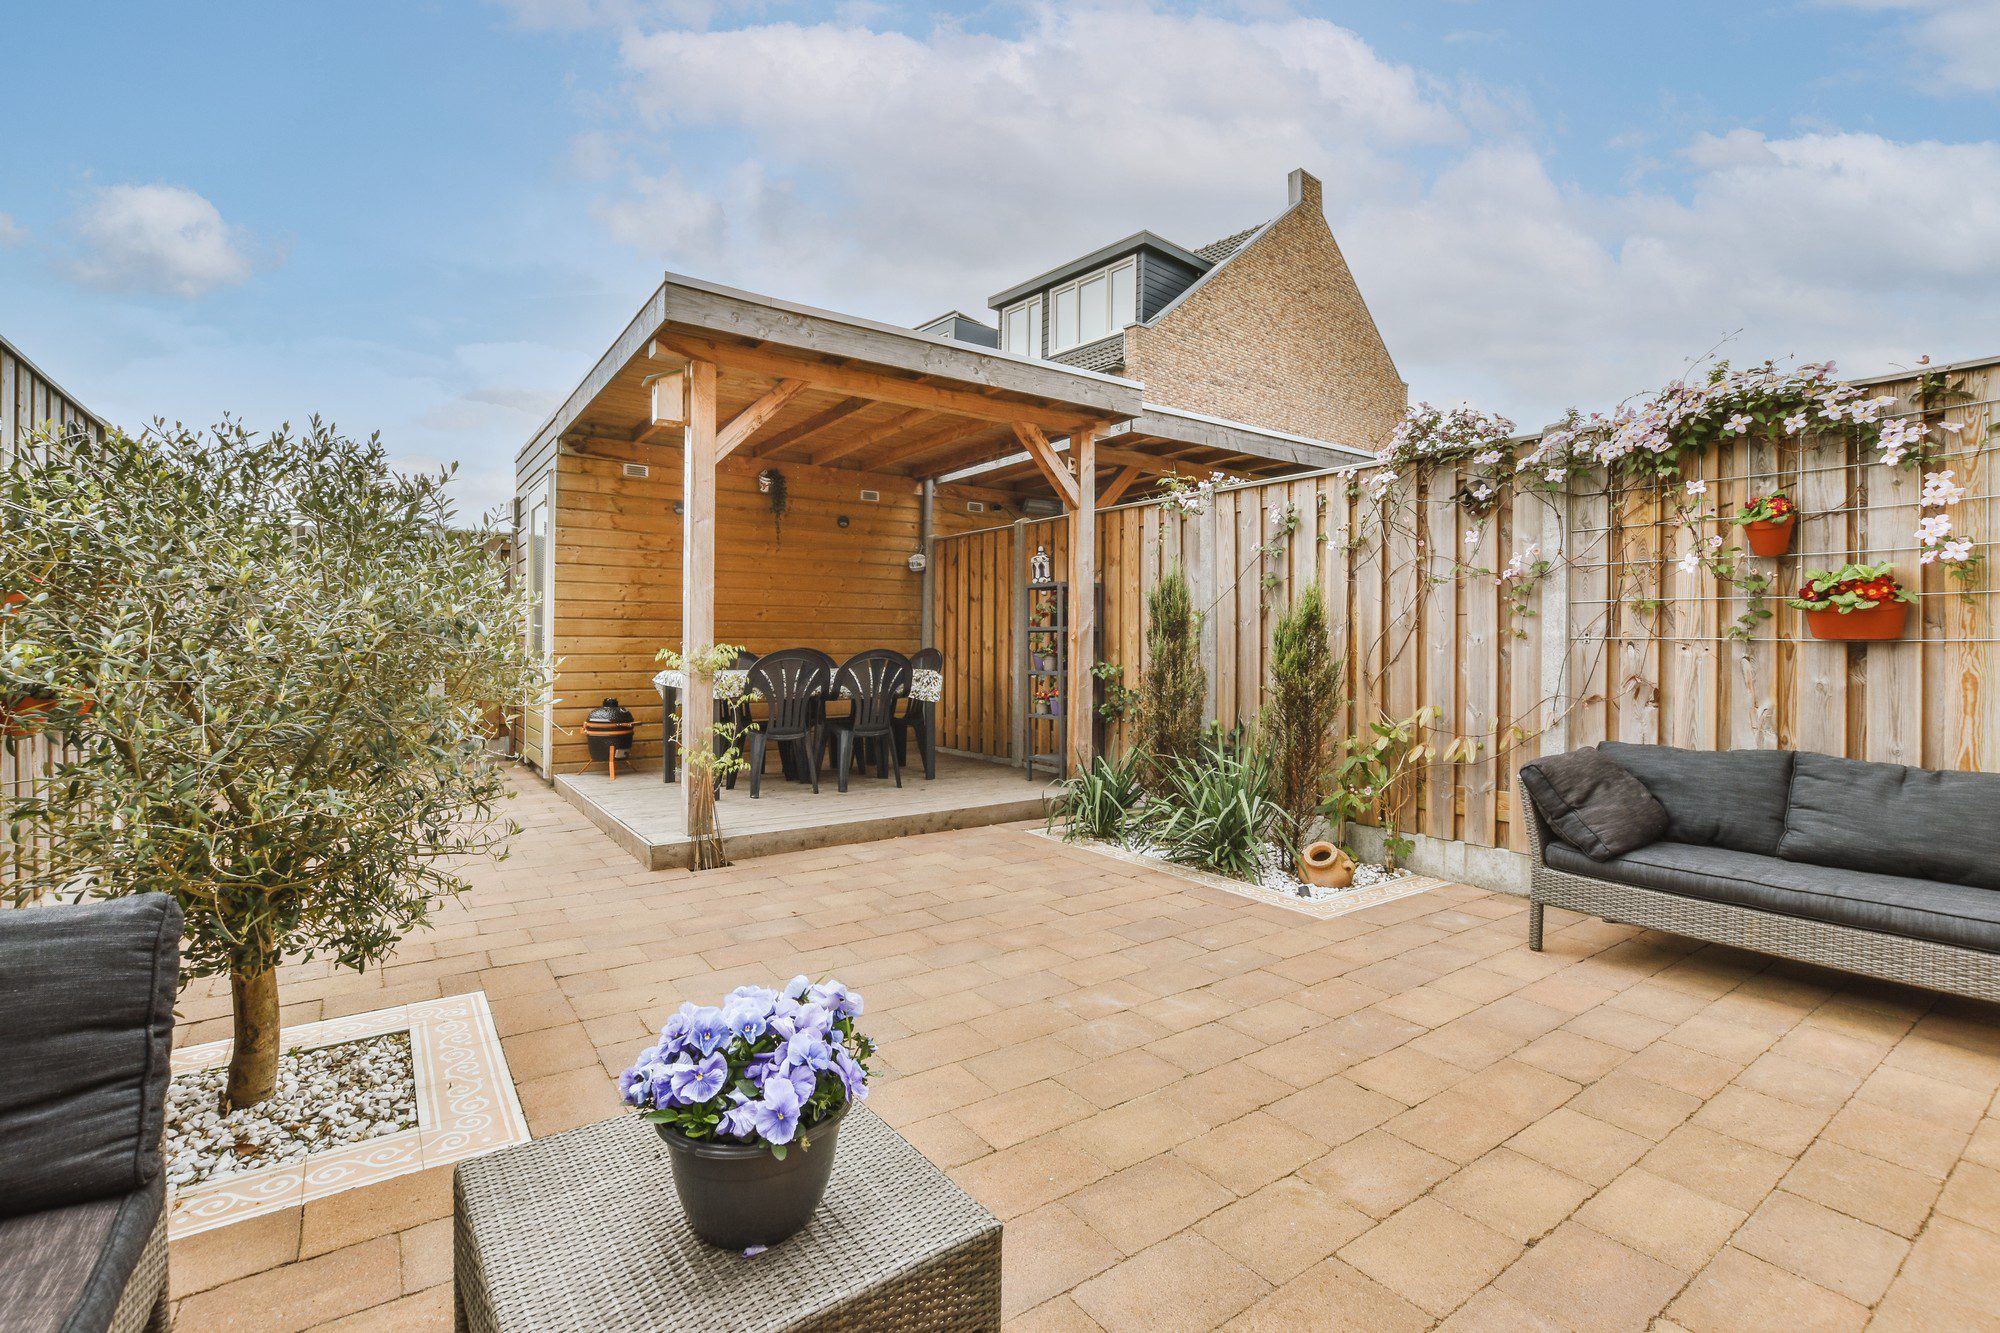 This image shows a cosy backyard patio area. The patio is paved with square stone tiles and surrounded by a wooden fence. On the left, there is an olive tree planted in a square section bordered by white stones. A wicker two-seater sofa with a thick black cushion is in the foreground on the right, with a small wicker table holding a pot of purple flowers in front of it.Centrally, there is a covered wooden structure that appears to be a gazebo or pergola with an open front, featuring a large wooden dining table with several chairs around it, providing a space for outdoor dining or gatherings. The back wall of this structure has shelves with various small decorative items, and it looks like a cosy, sheltered spot for relaxation.The wooden fence is adorned with climbing plants and flower pots, adding touches of greenery and colour to the space. There are a few other pots and decorations scattered around, which give the patio a lived-in and personal feel. The sky is partly cloudy, suggesting it might be a pleasant but not overly sunny day, perfect for enjoying time outdoors.